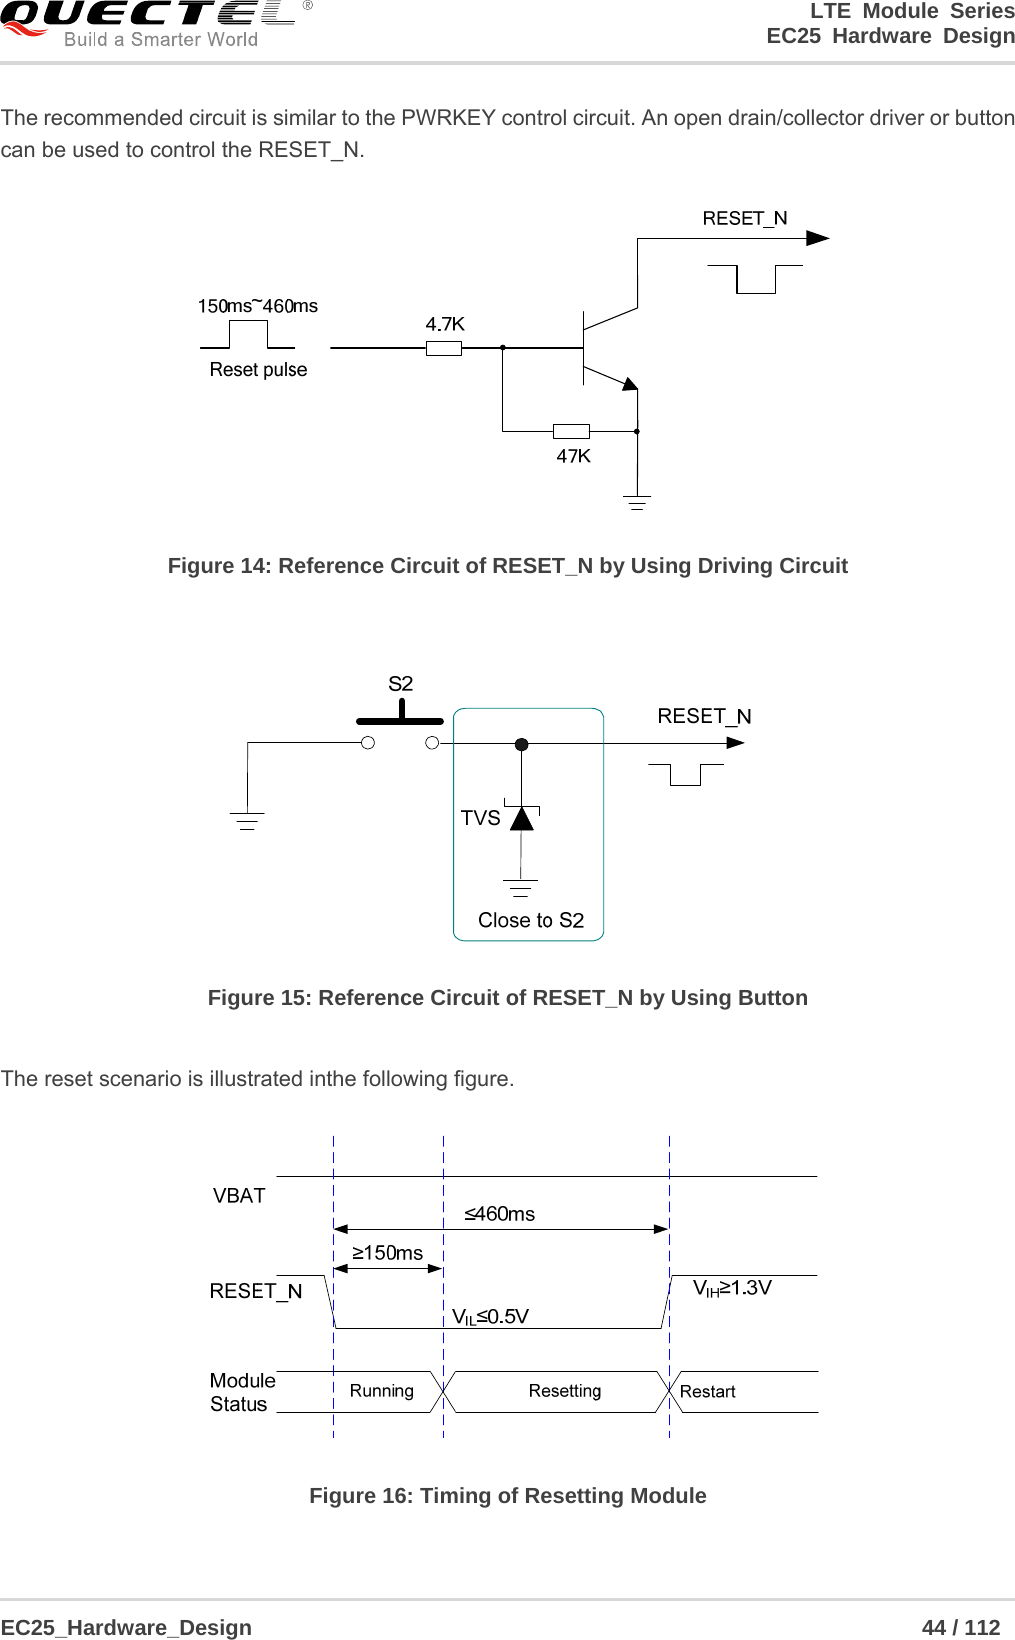 LTE Module Series                                                  EC25 Hardware Design  EC25_Hardware_Design                                                             44 / 112    The recommended circuit is similar to the PWRKEY control circuit. An open drain/collector driver or button can be used to control the RESET_N.  Figure 14: Reference Circuit of RESET_N by Using Driving Circuit   Figure 15: Reference Circuit of RESET_N by Using Button  The reset scenario is illustrated inthe following figure.  Figure 16: Timing of Resetting Module 